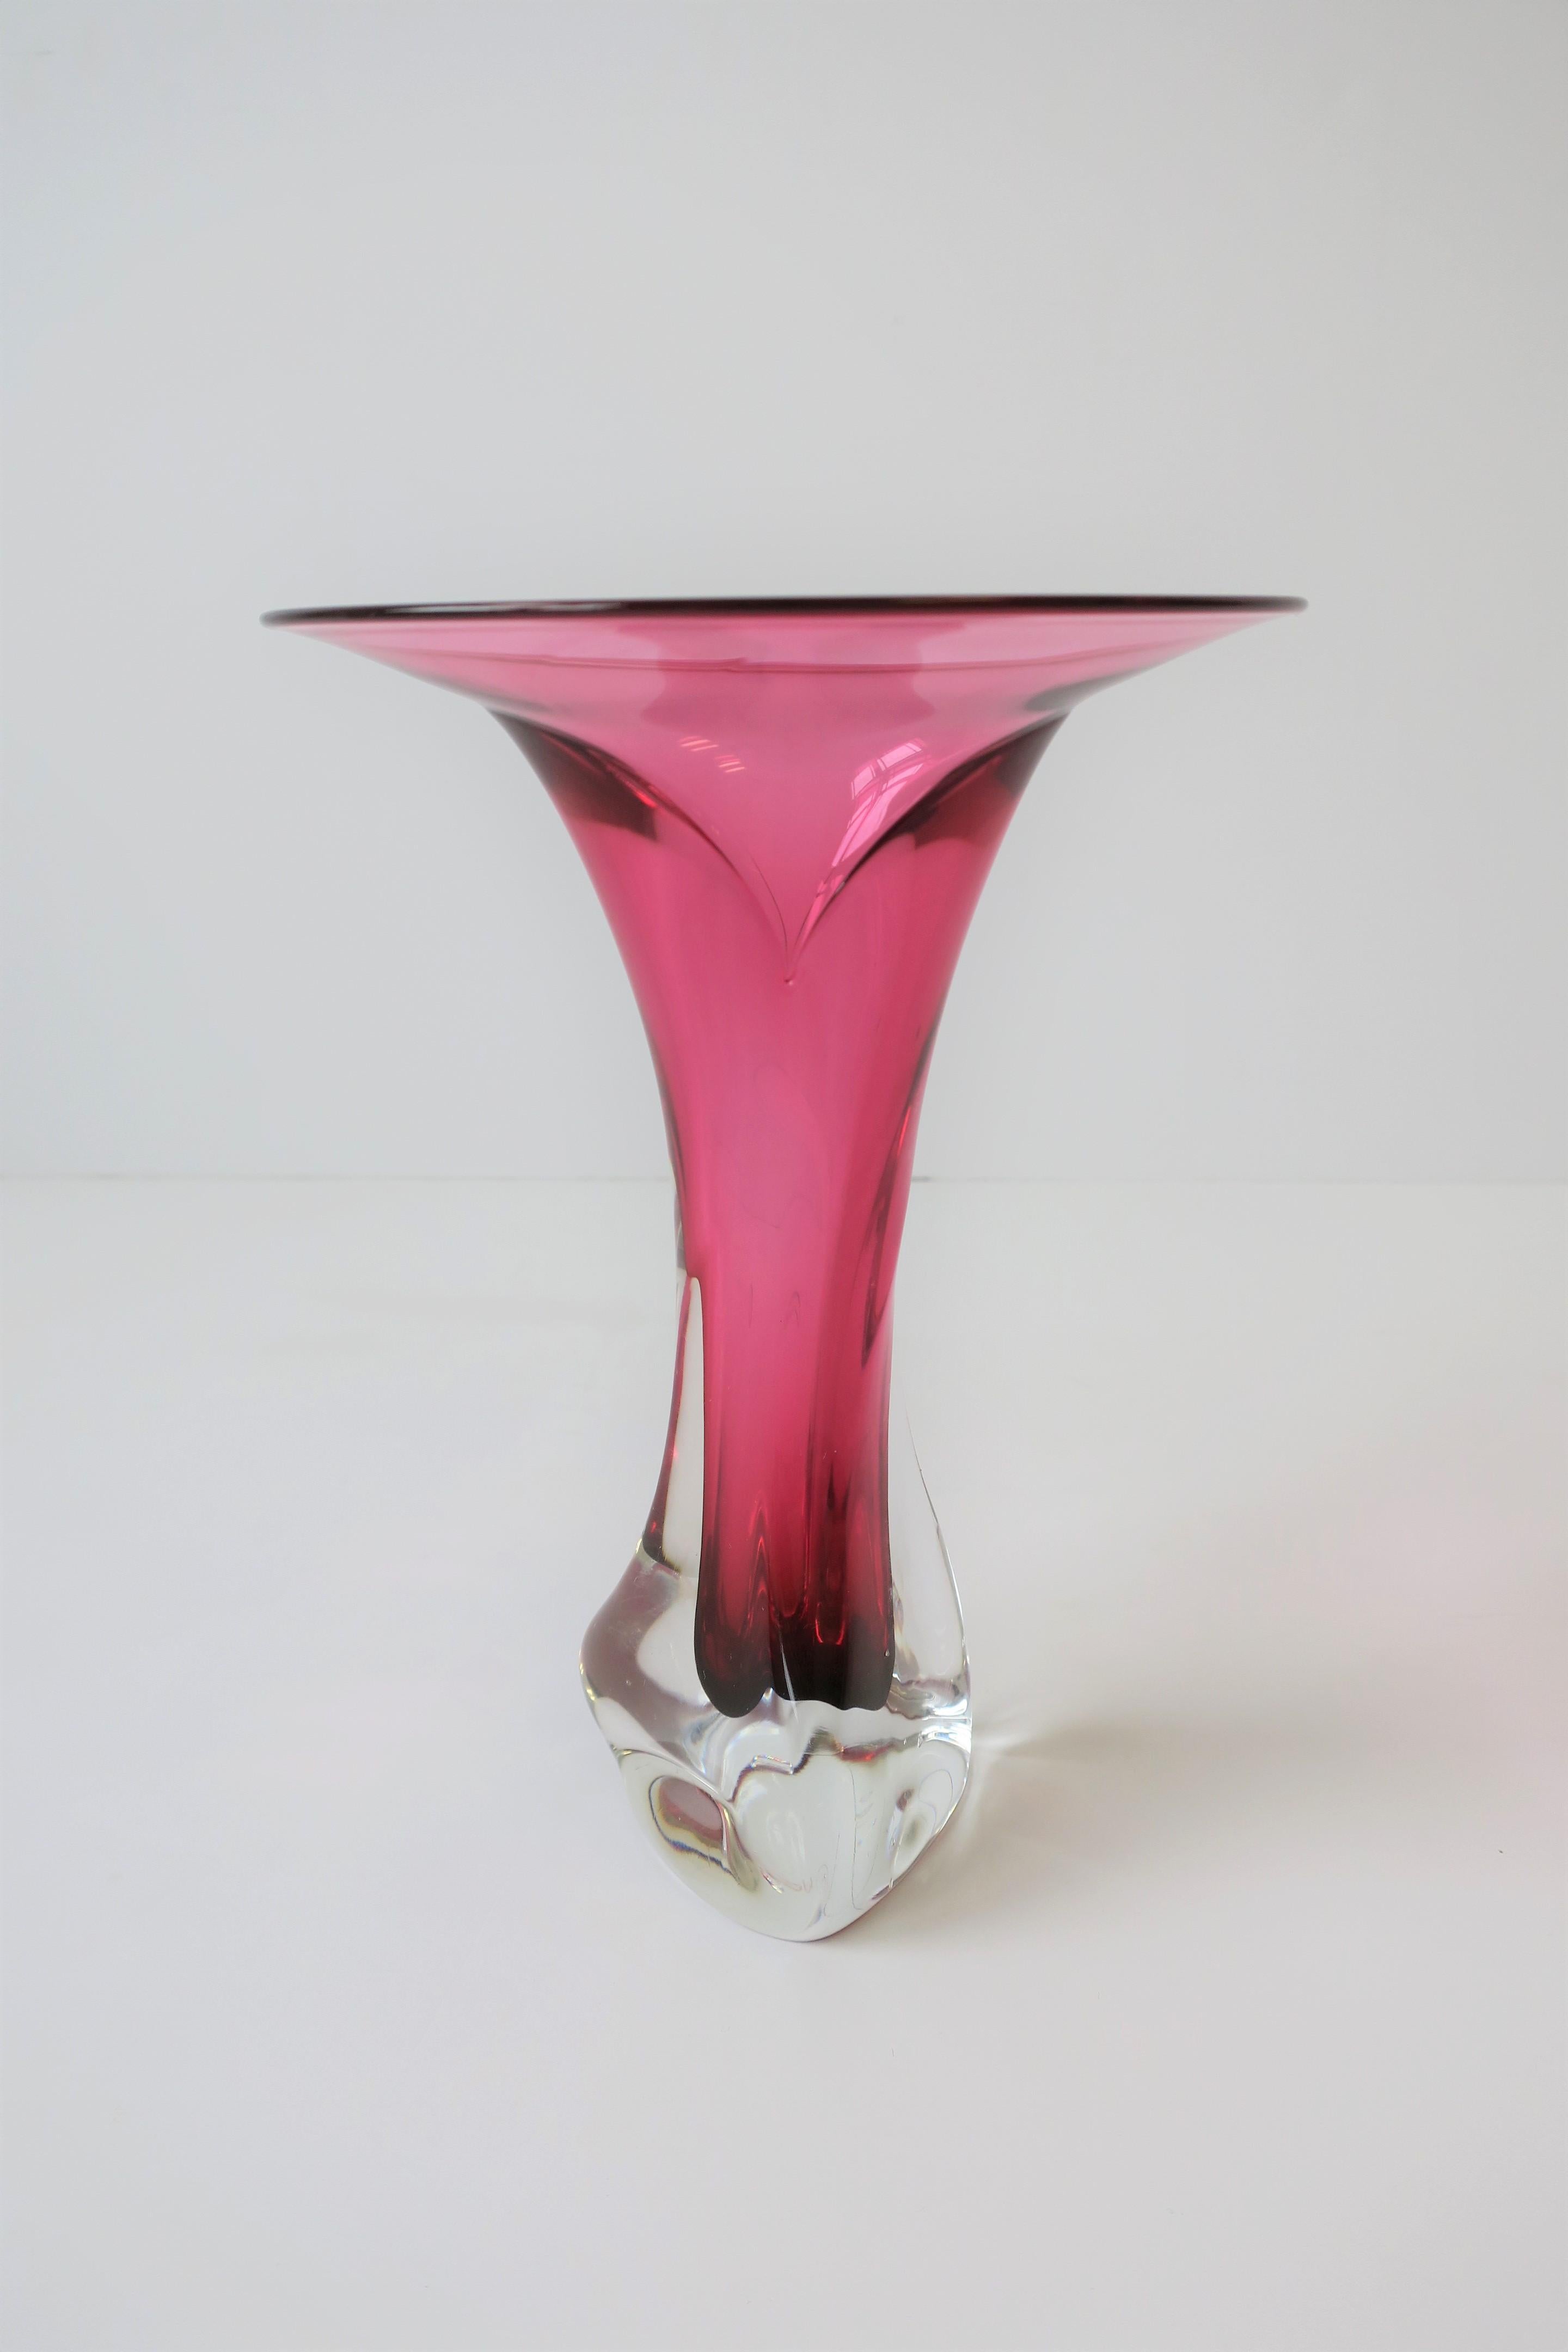 A very beautiful signed vibrant hot pink and clear art glass vase, circa 1990s. Signature and year on bottom as show in images #15 and 16. Vase measures: 5.5